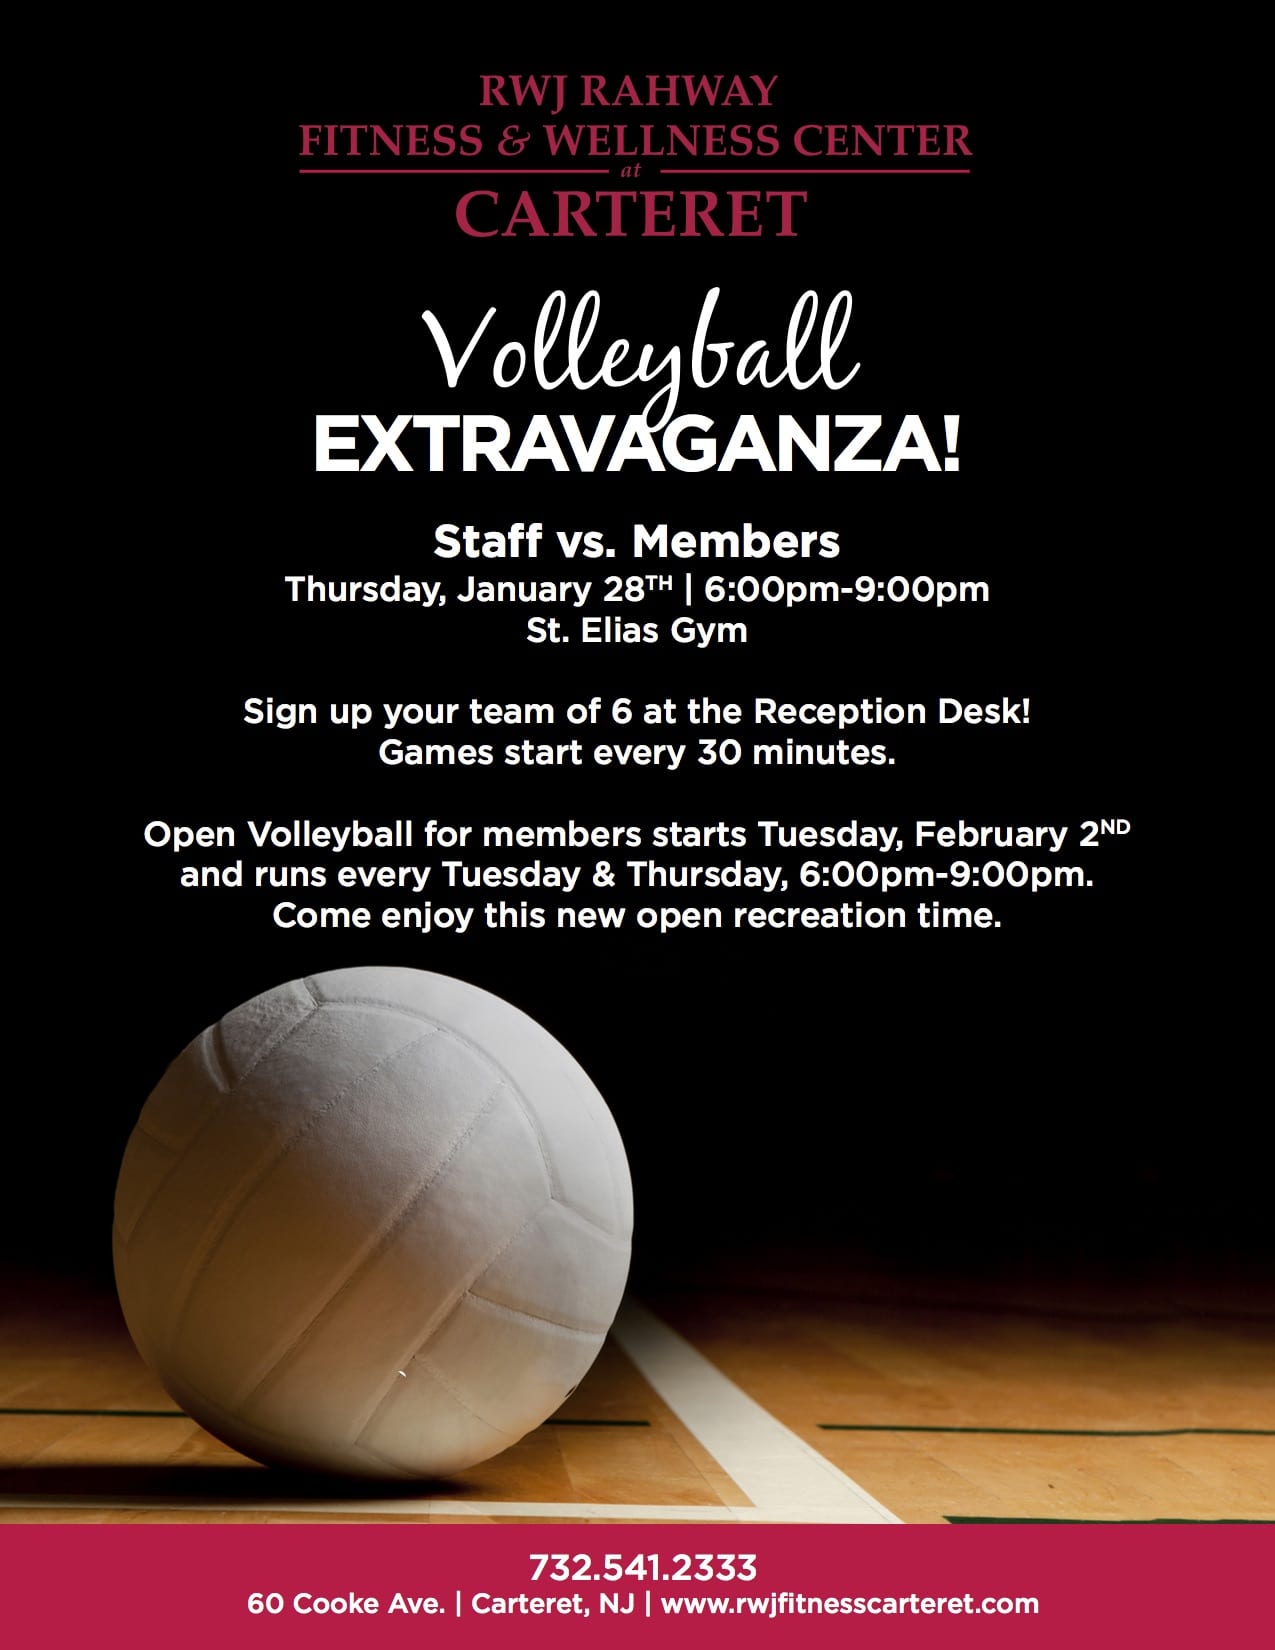 Carteret Volleyball Extravaganza January 28